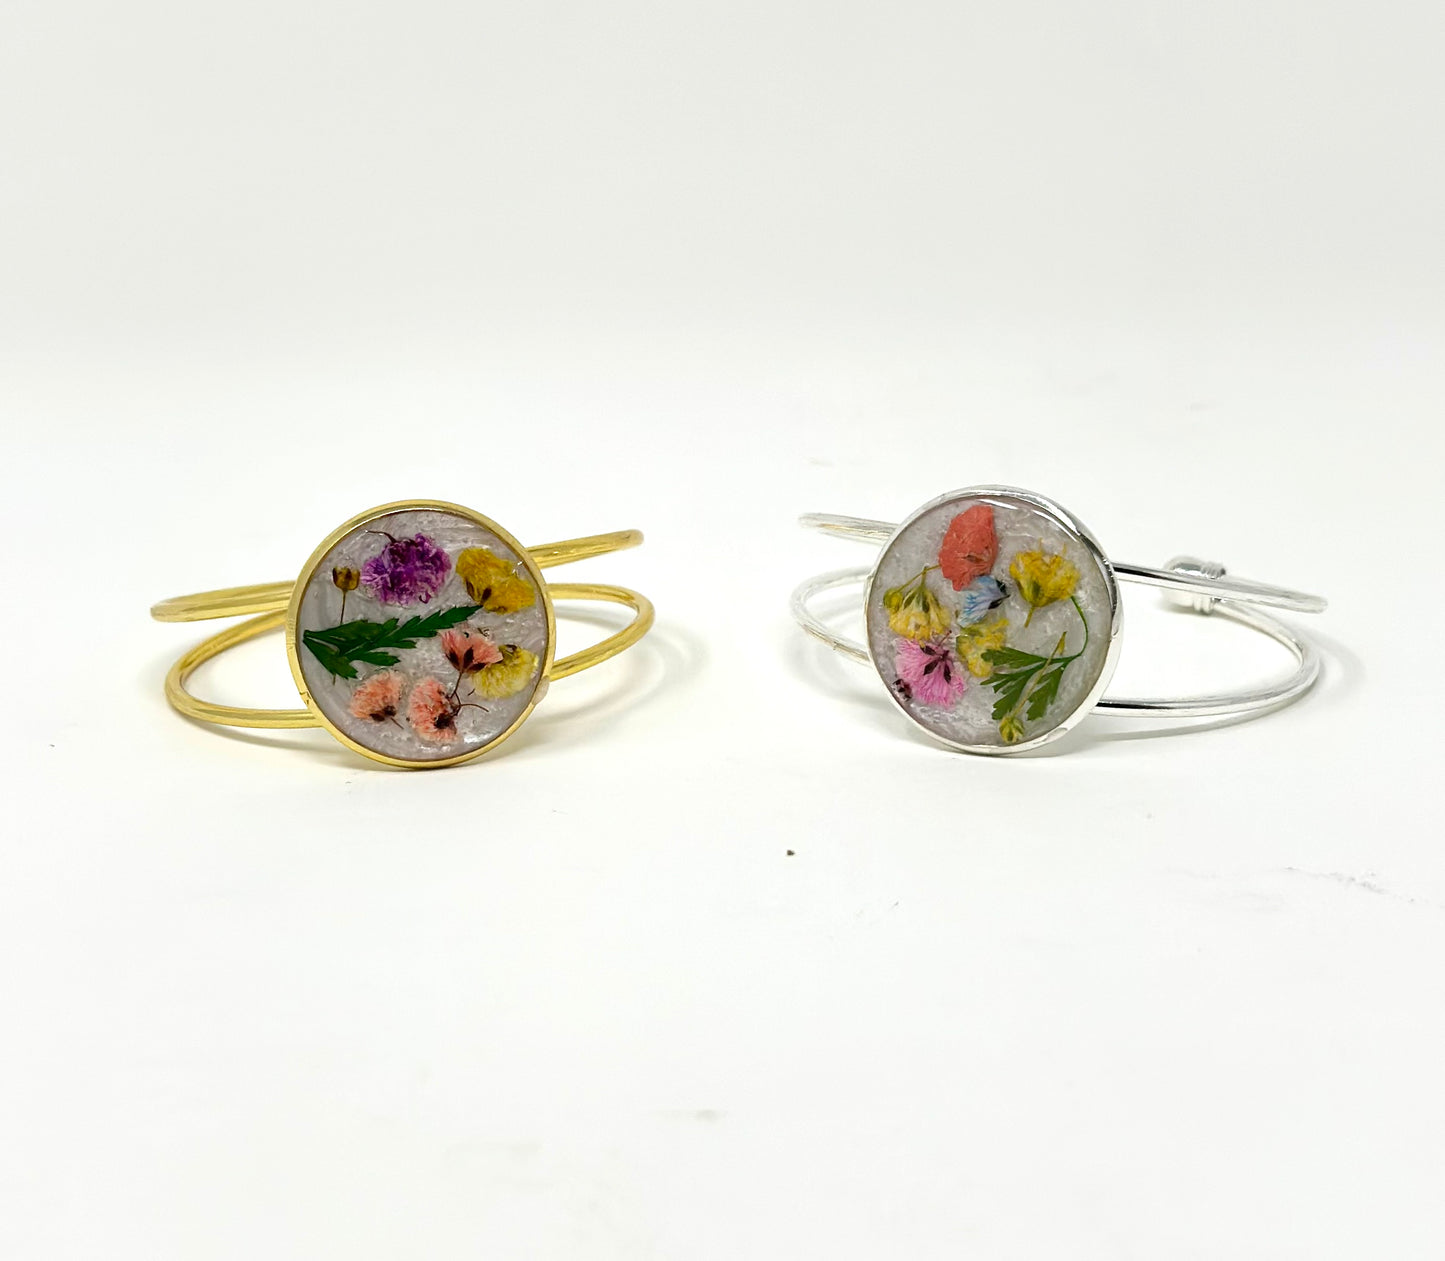 Sat, Jul 22nd, 3-5p "Resin Jewelry Making" Public Houston Wine and Paint Class